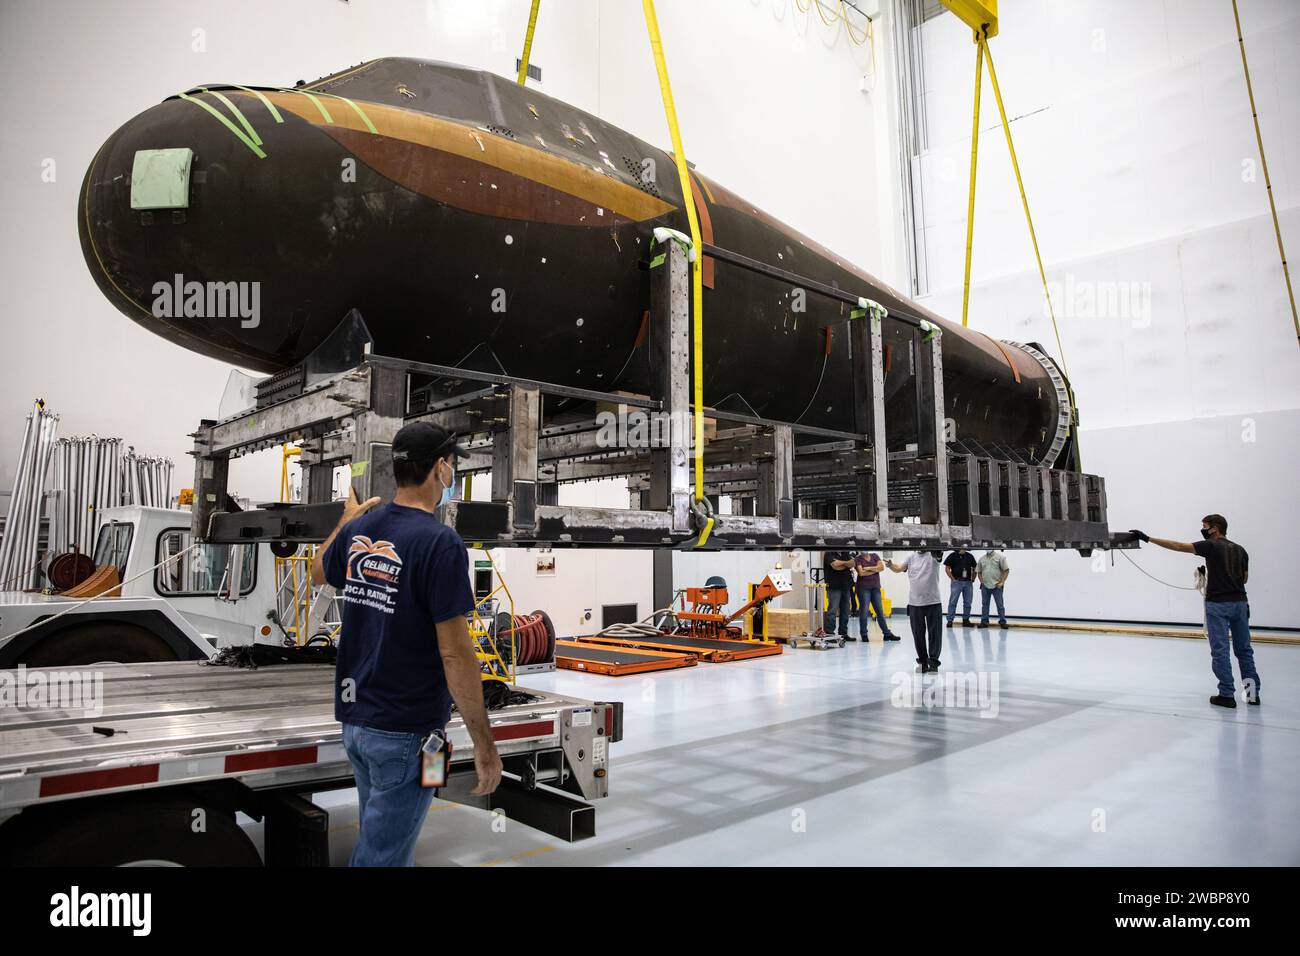 Inside the low bay of the Space Station Processing Facility at NASA’s Kennedy Space Center in Florida, Sierra Nevada Corporation’s (SNC) Dream Chaser pressure test article on its support structure is lifted up by crane from the flatbed truck on June 3, 2020, for its move into the high bay. The test article was shipped from Louisville, Colorado. It is similar to the actual pressurized cabin being used in the Dream Chaser spaceplane for Commercial Resupply Services-2 (CRS-2) missions. NASA selected Dream Chaser to provide cargo delivery, return and disposal service for the International Space St Stock Photo